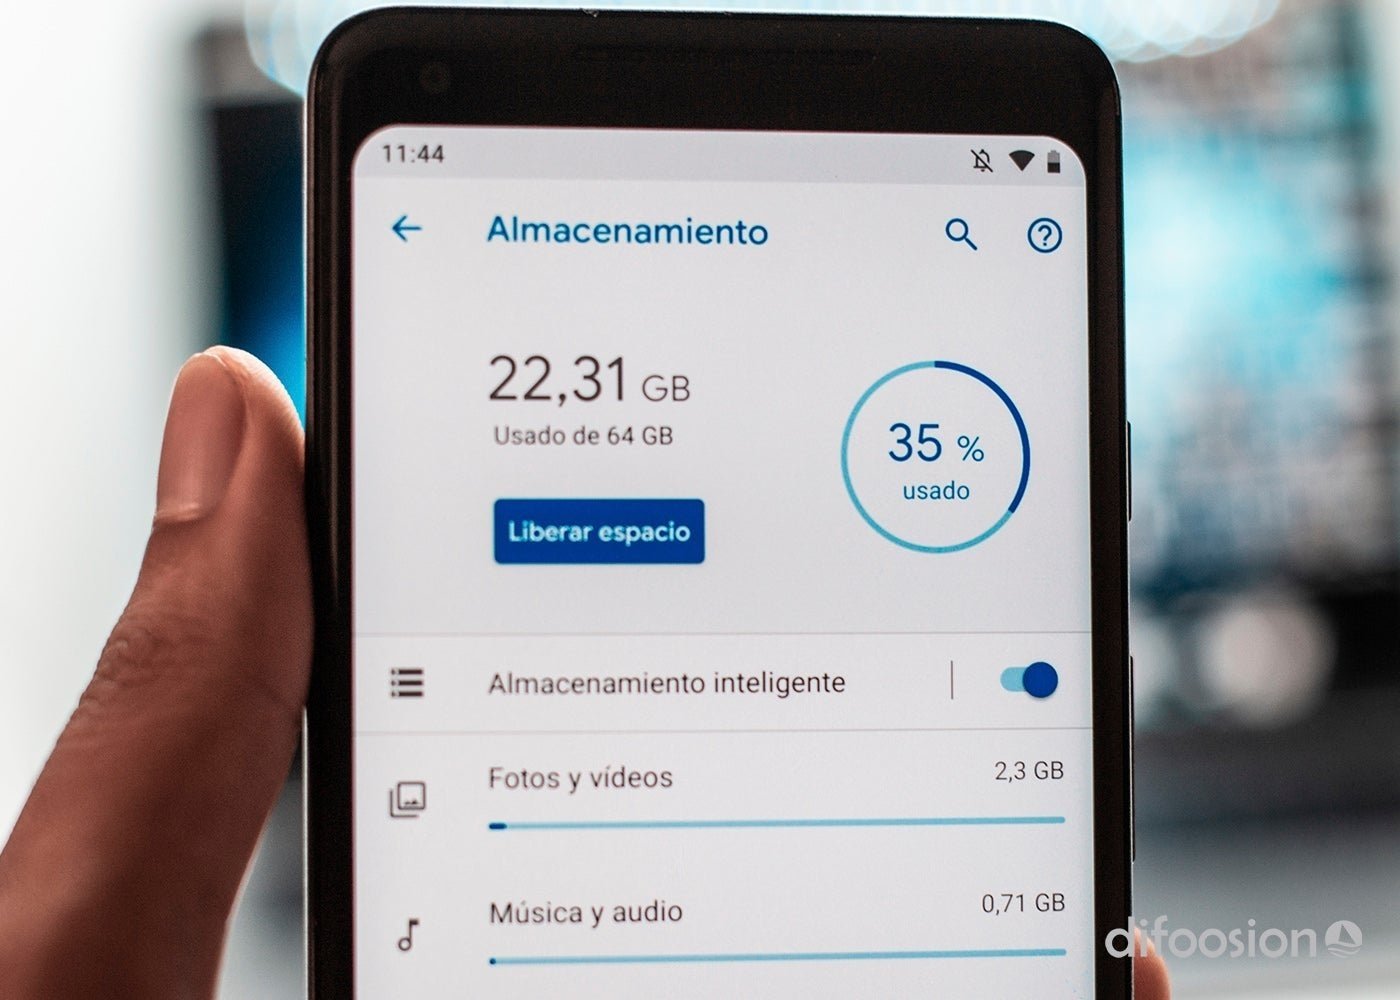 3 reliable tricks to free up storage space on your Android phone